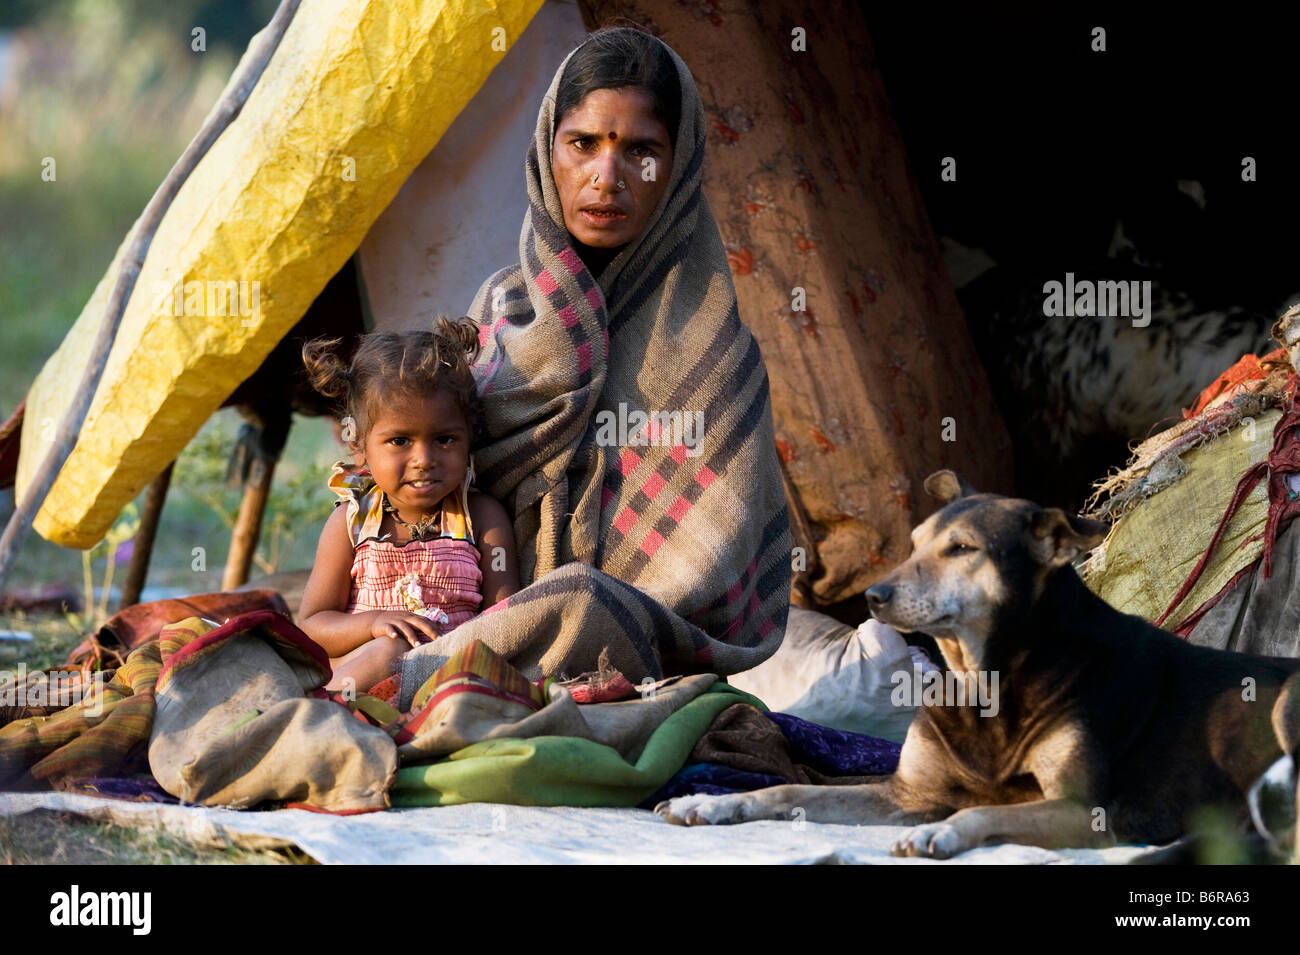 Very poor nomadic indian mother and baby outside their tent in morning sunlight. Andhra Pradesh, India Stock Photo